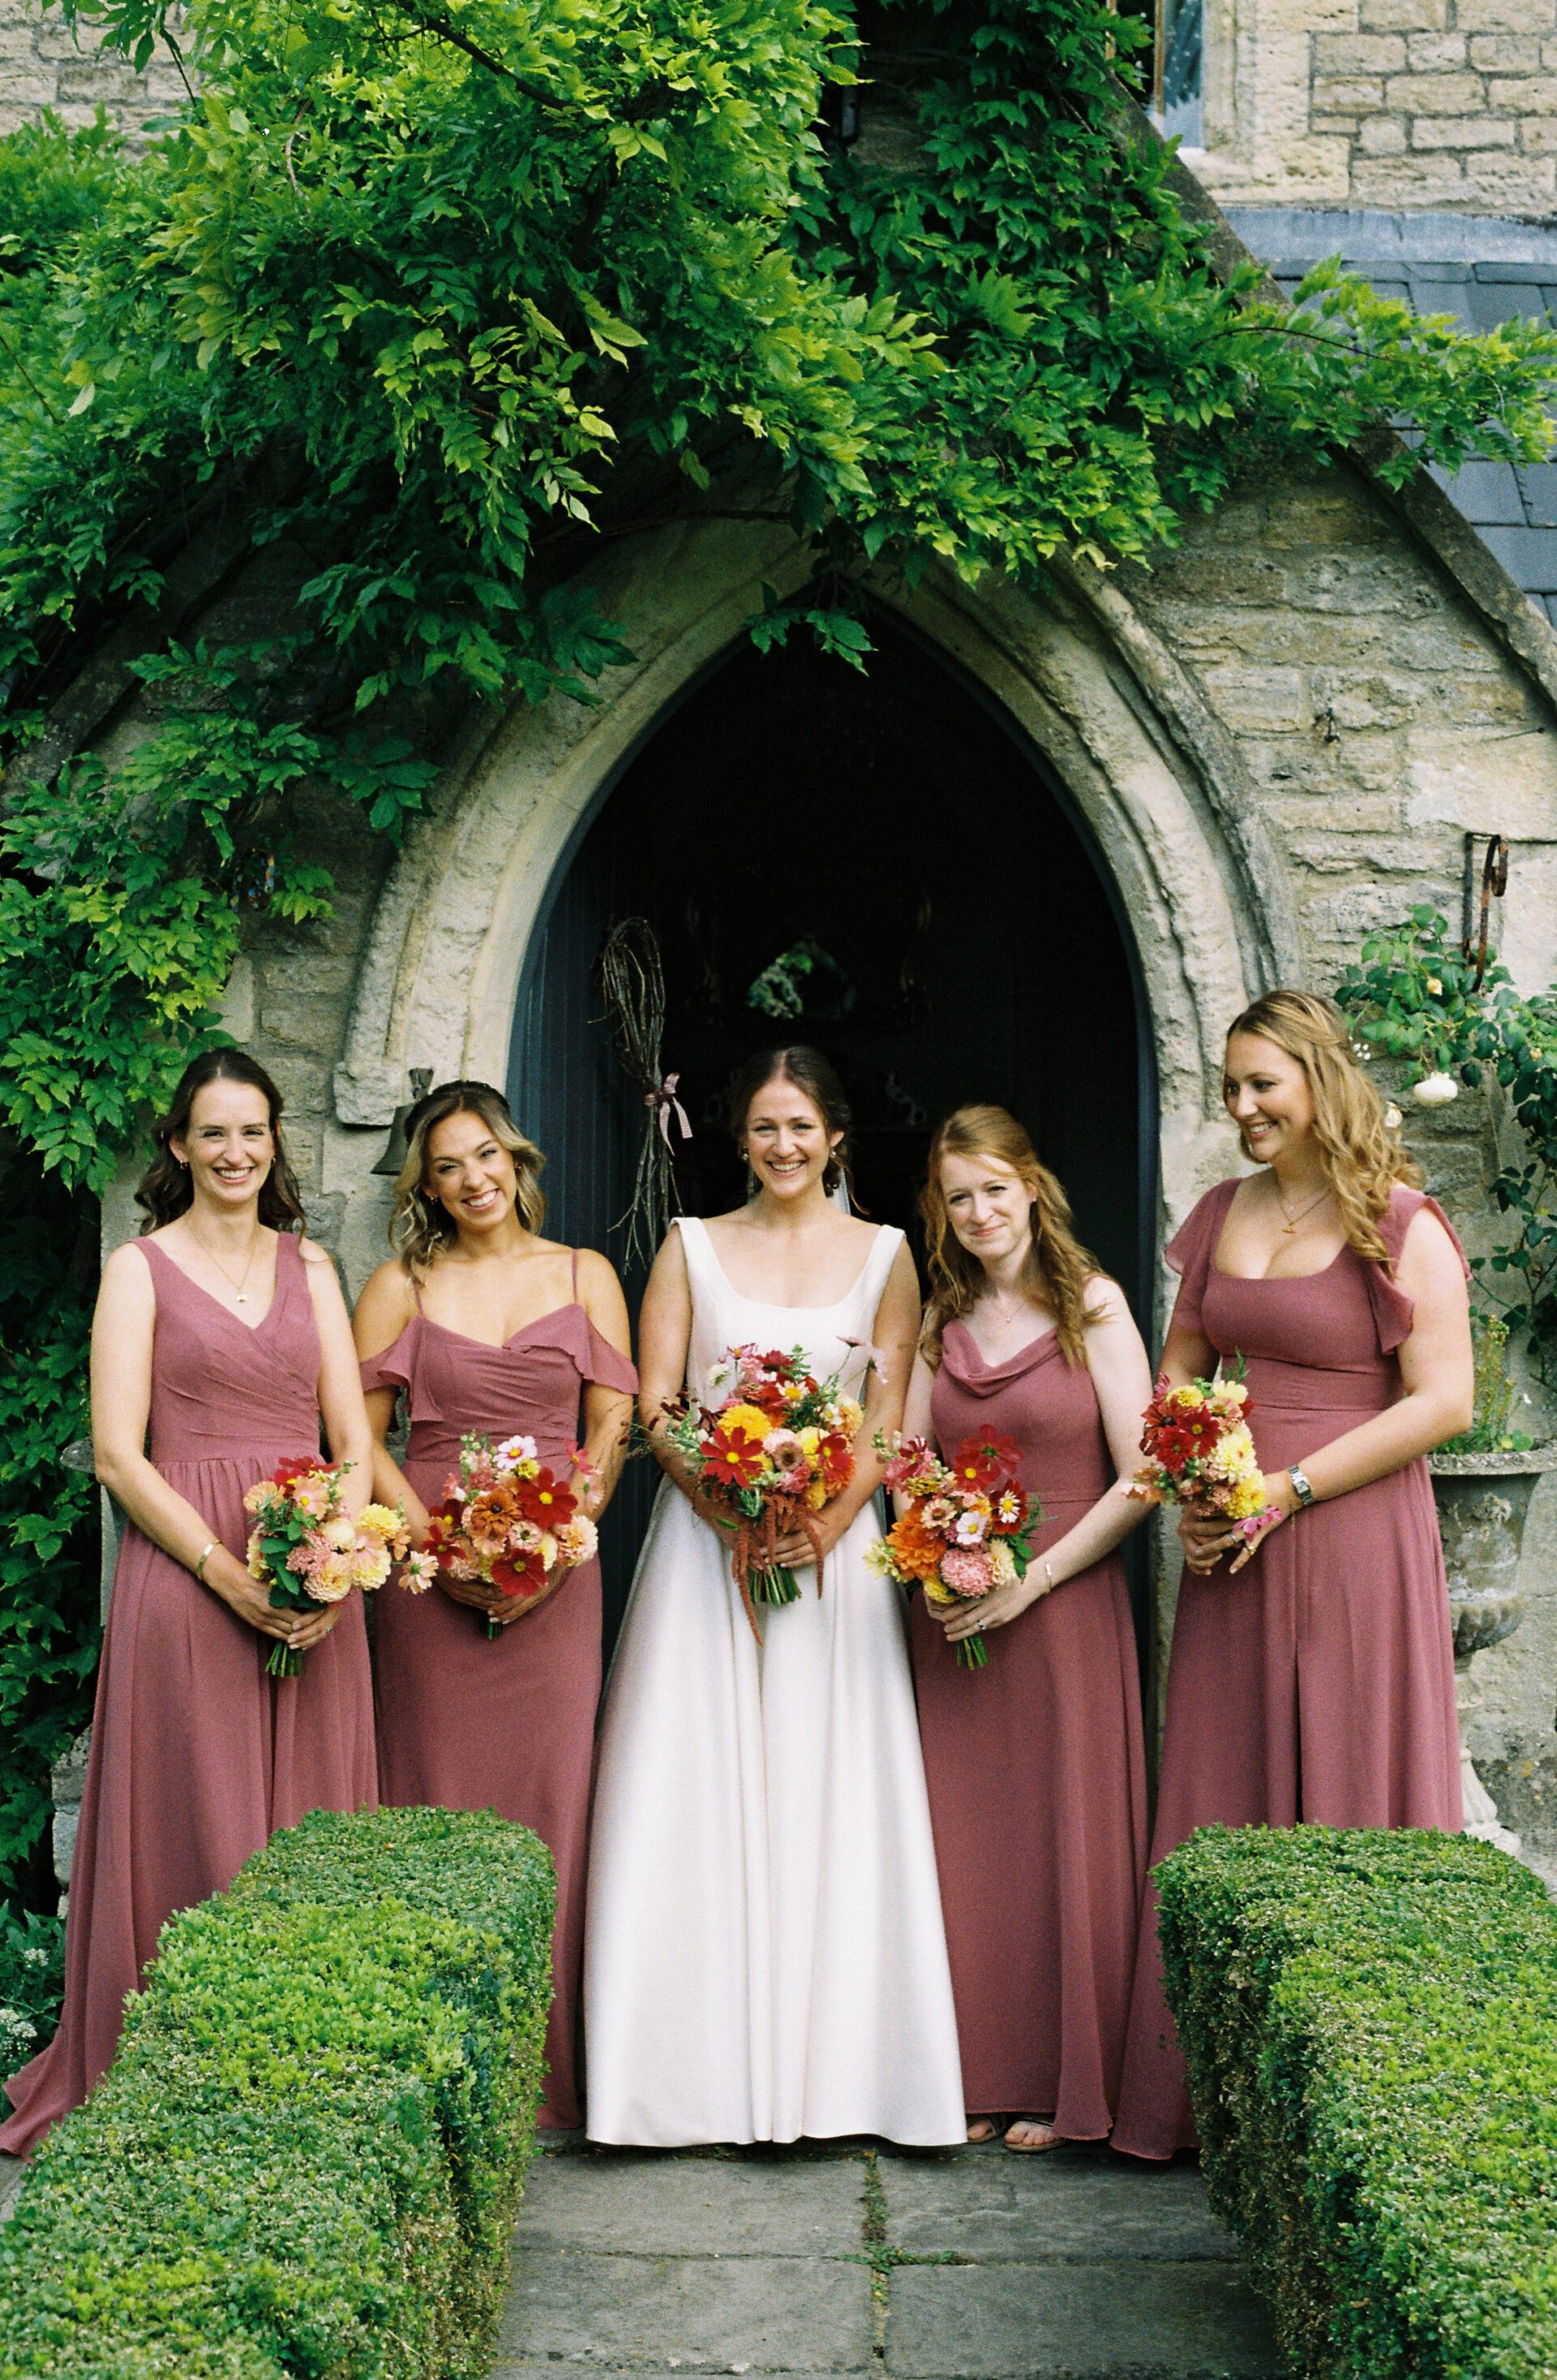 35mm portrait of the bride and her bridesmaids